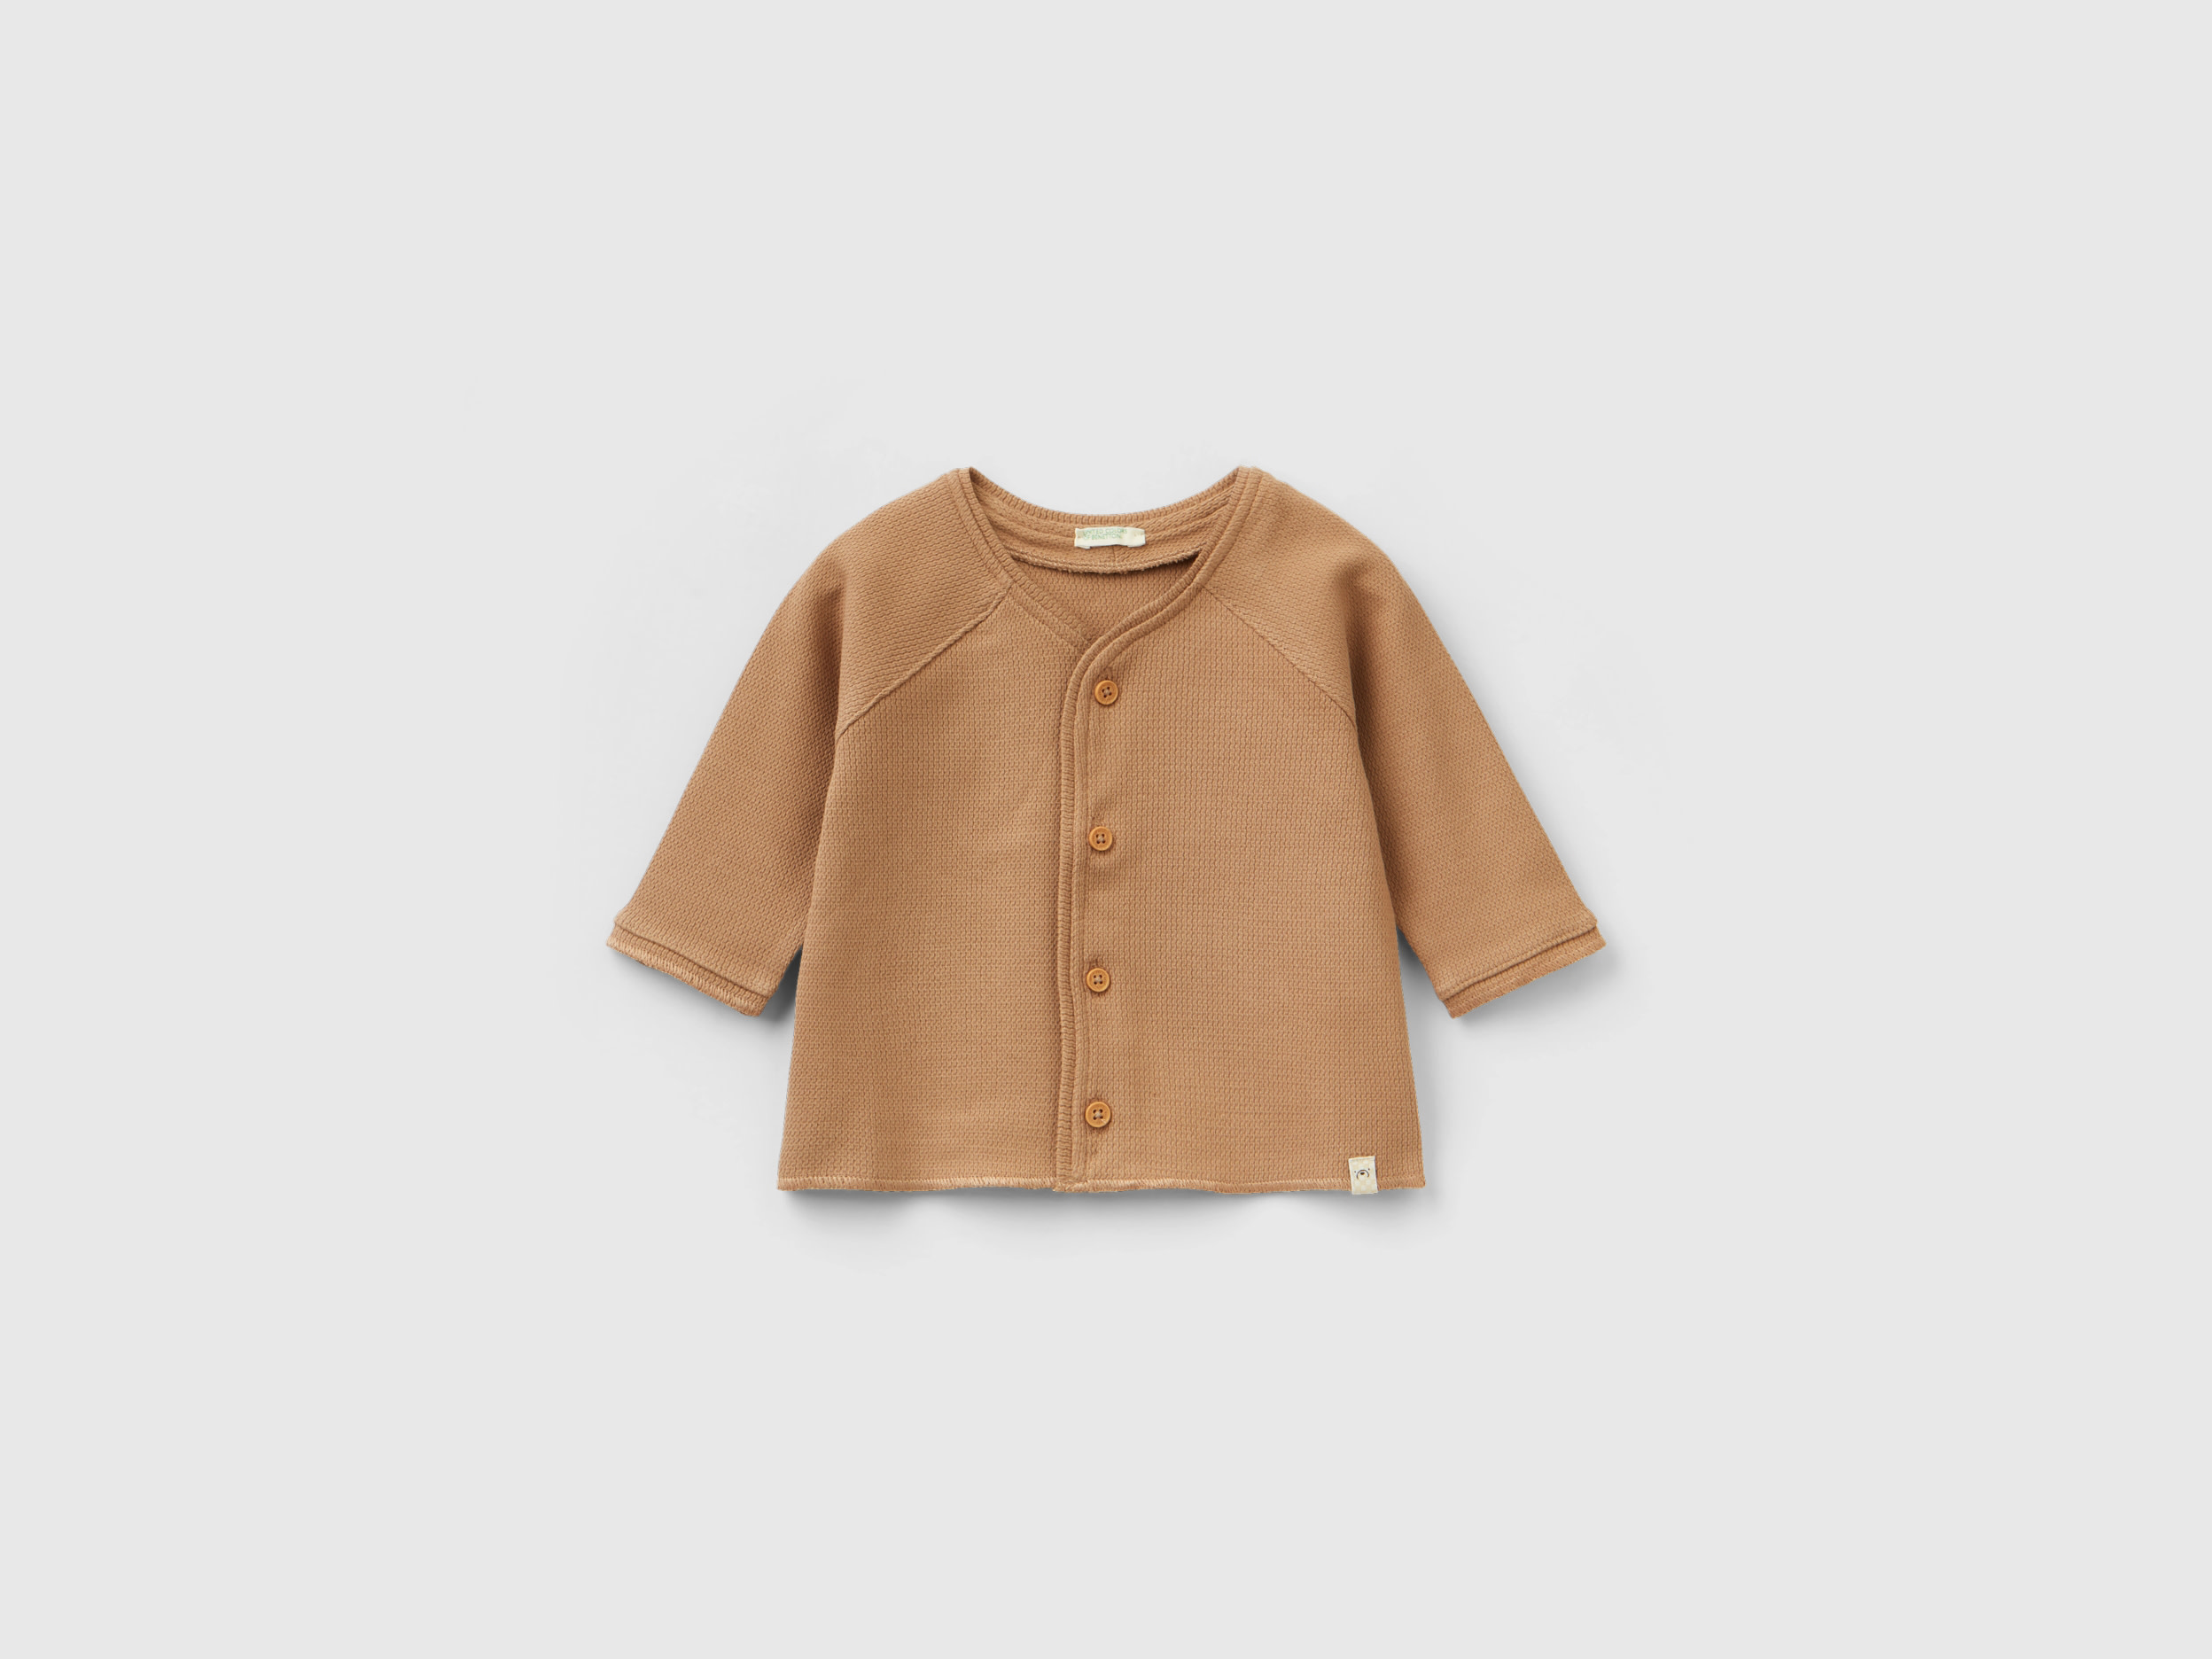 Benetton, Sweatshirt With Buttons, size 12-18, Camel, Kids